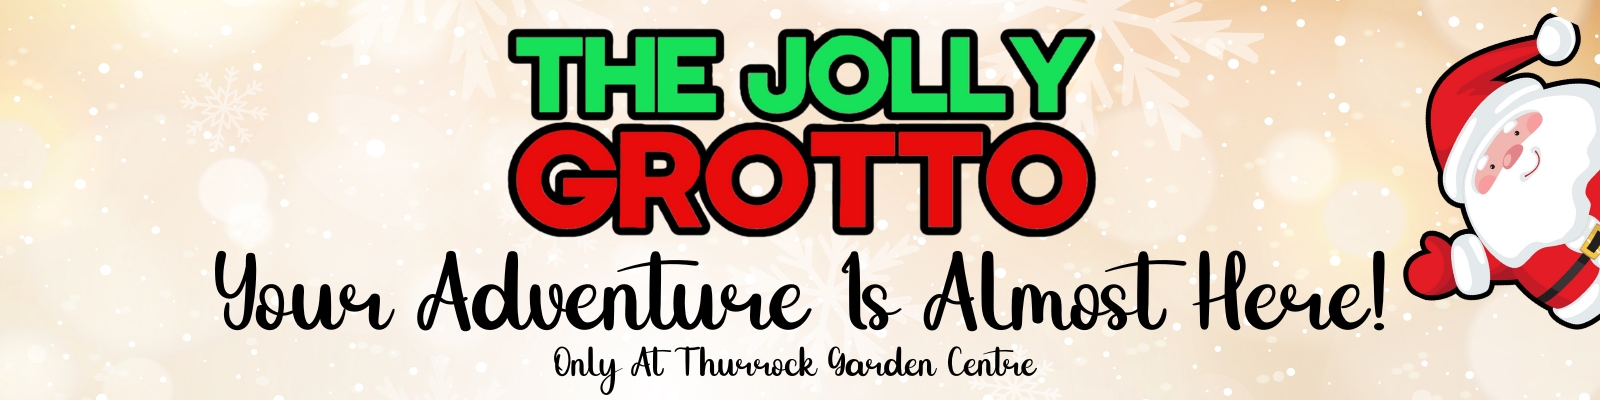 The Jolly Grotto Thurrock